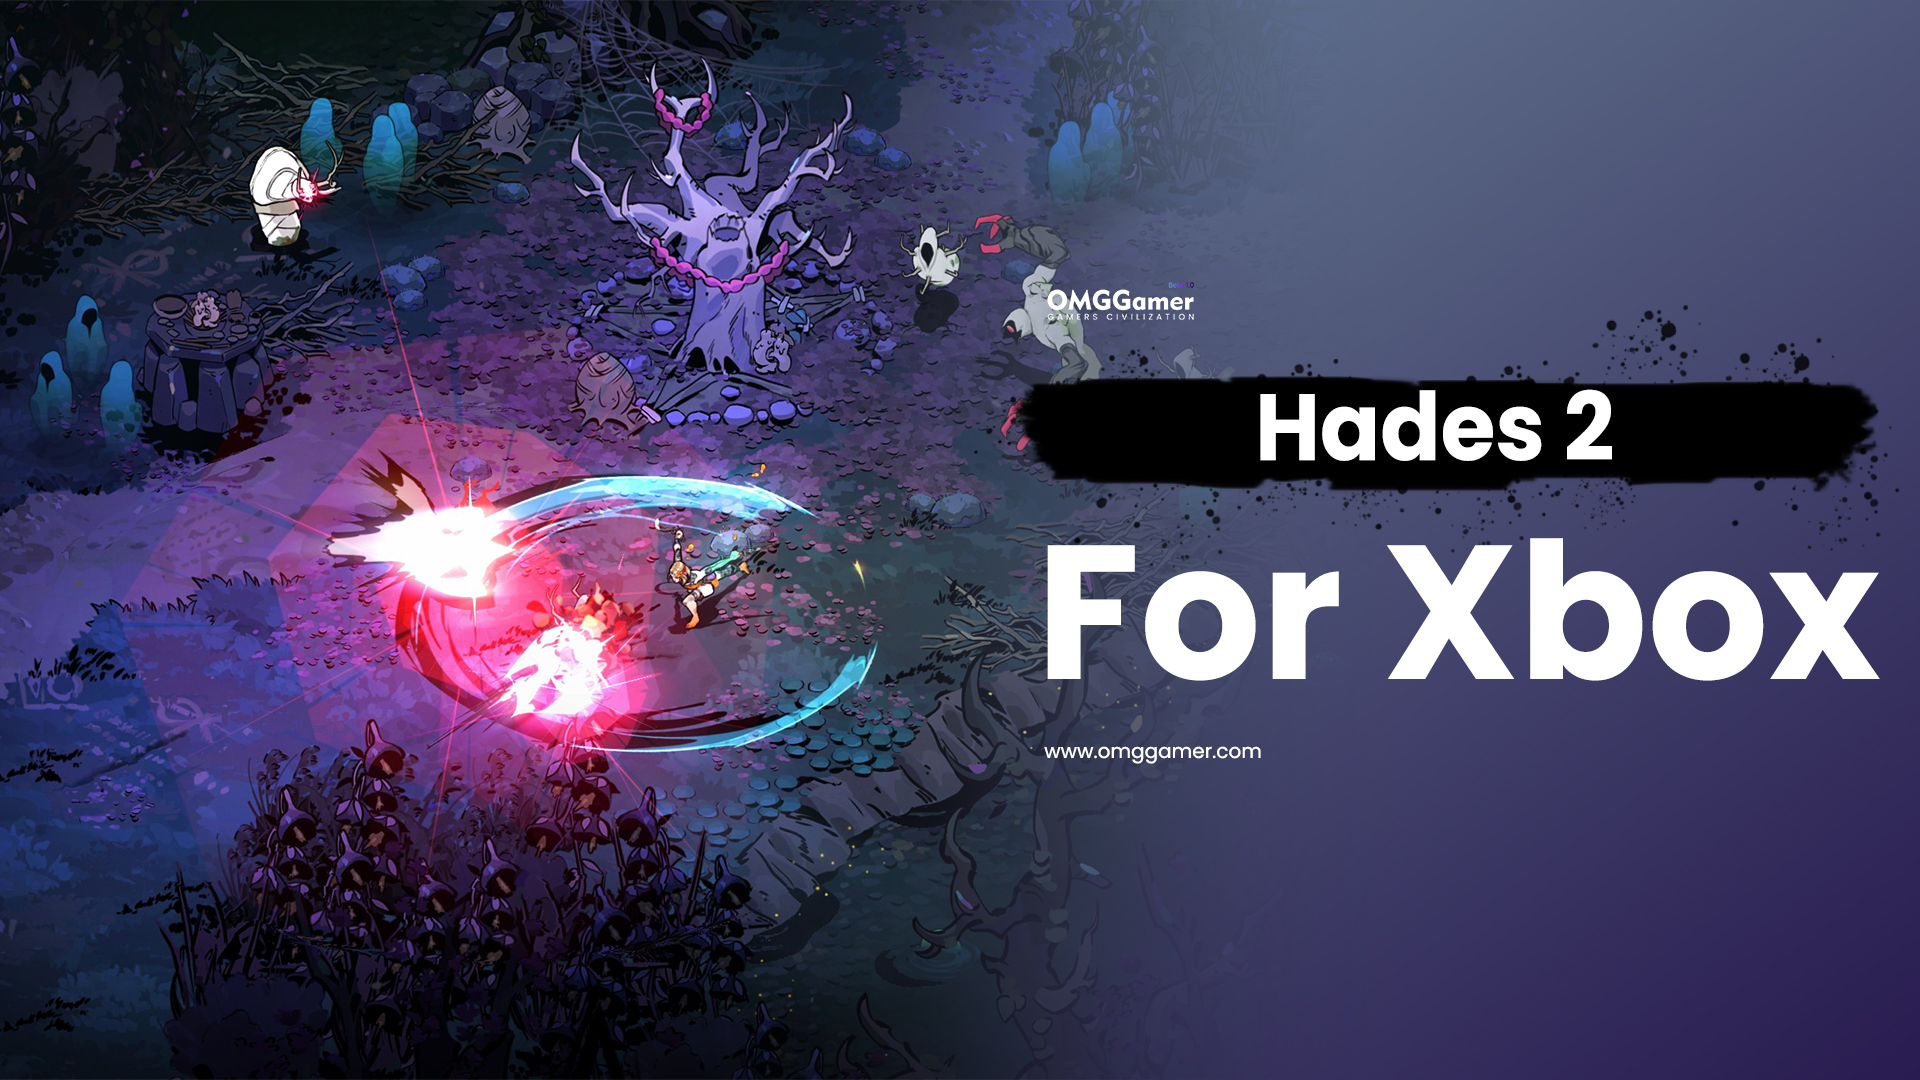 Hades 2 for Xbox